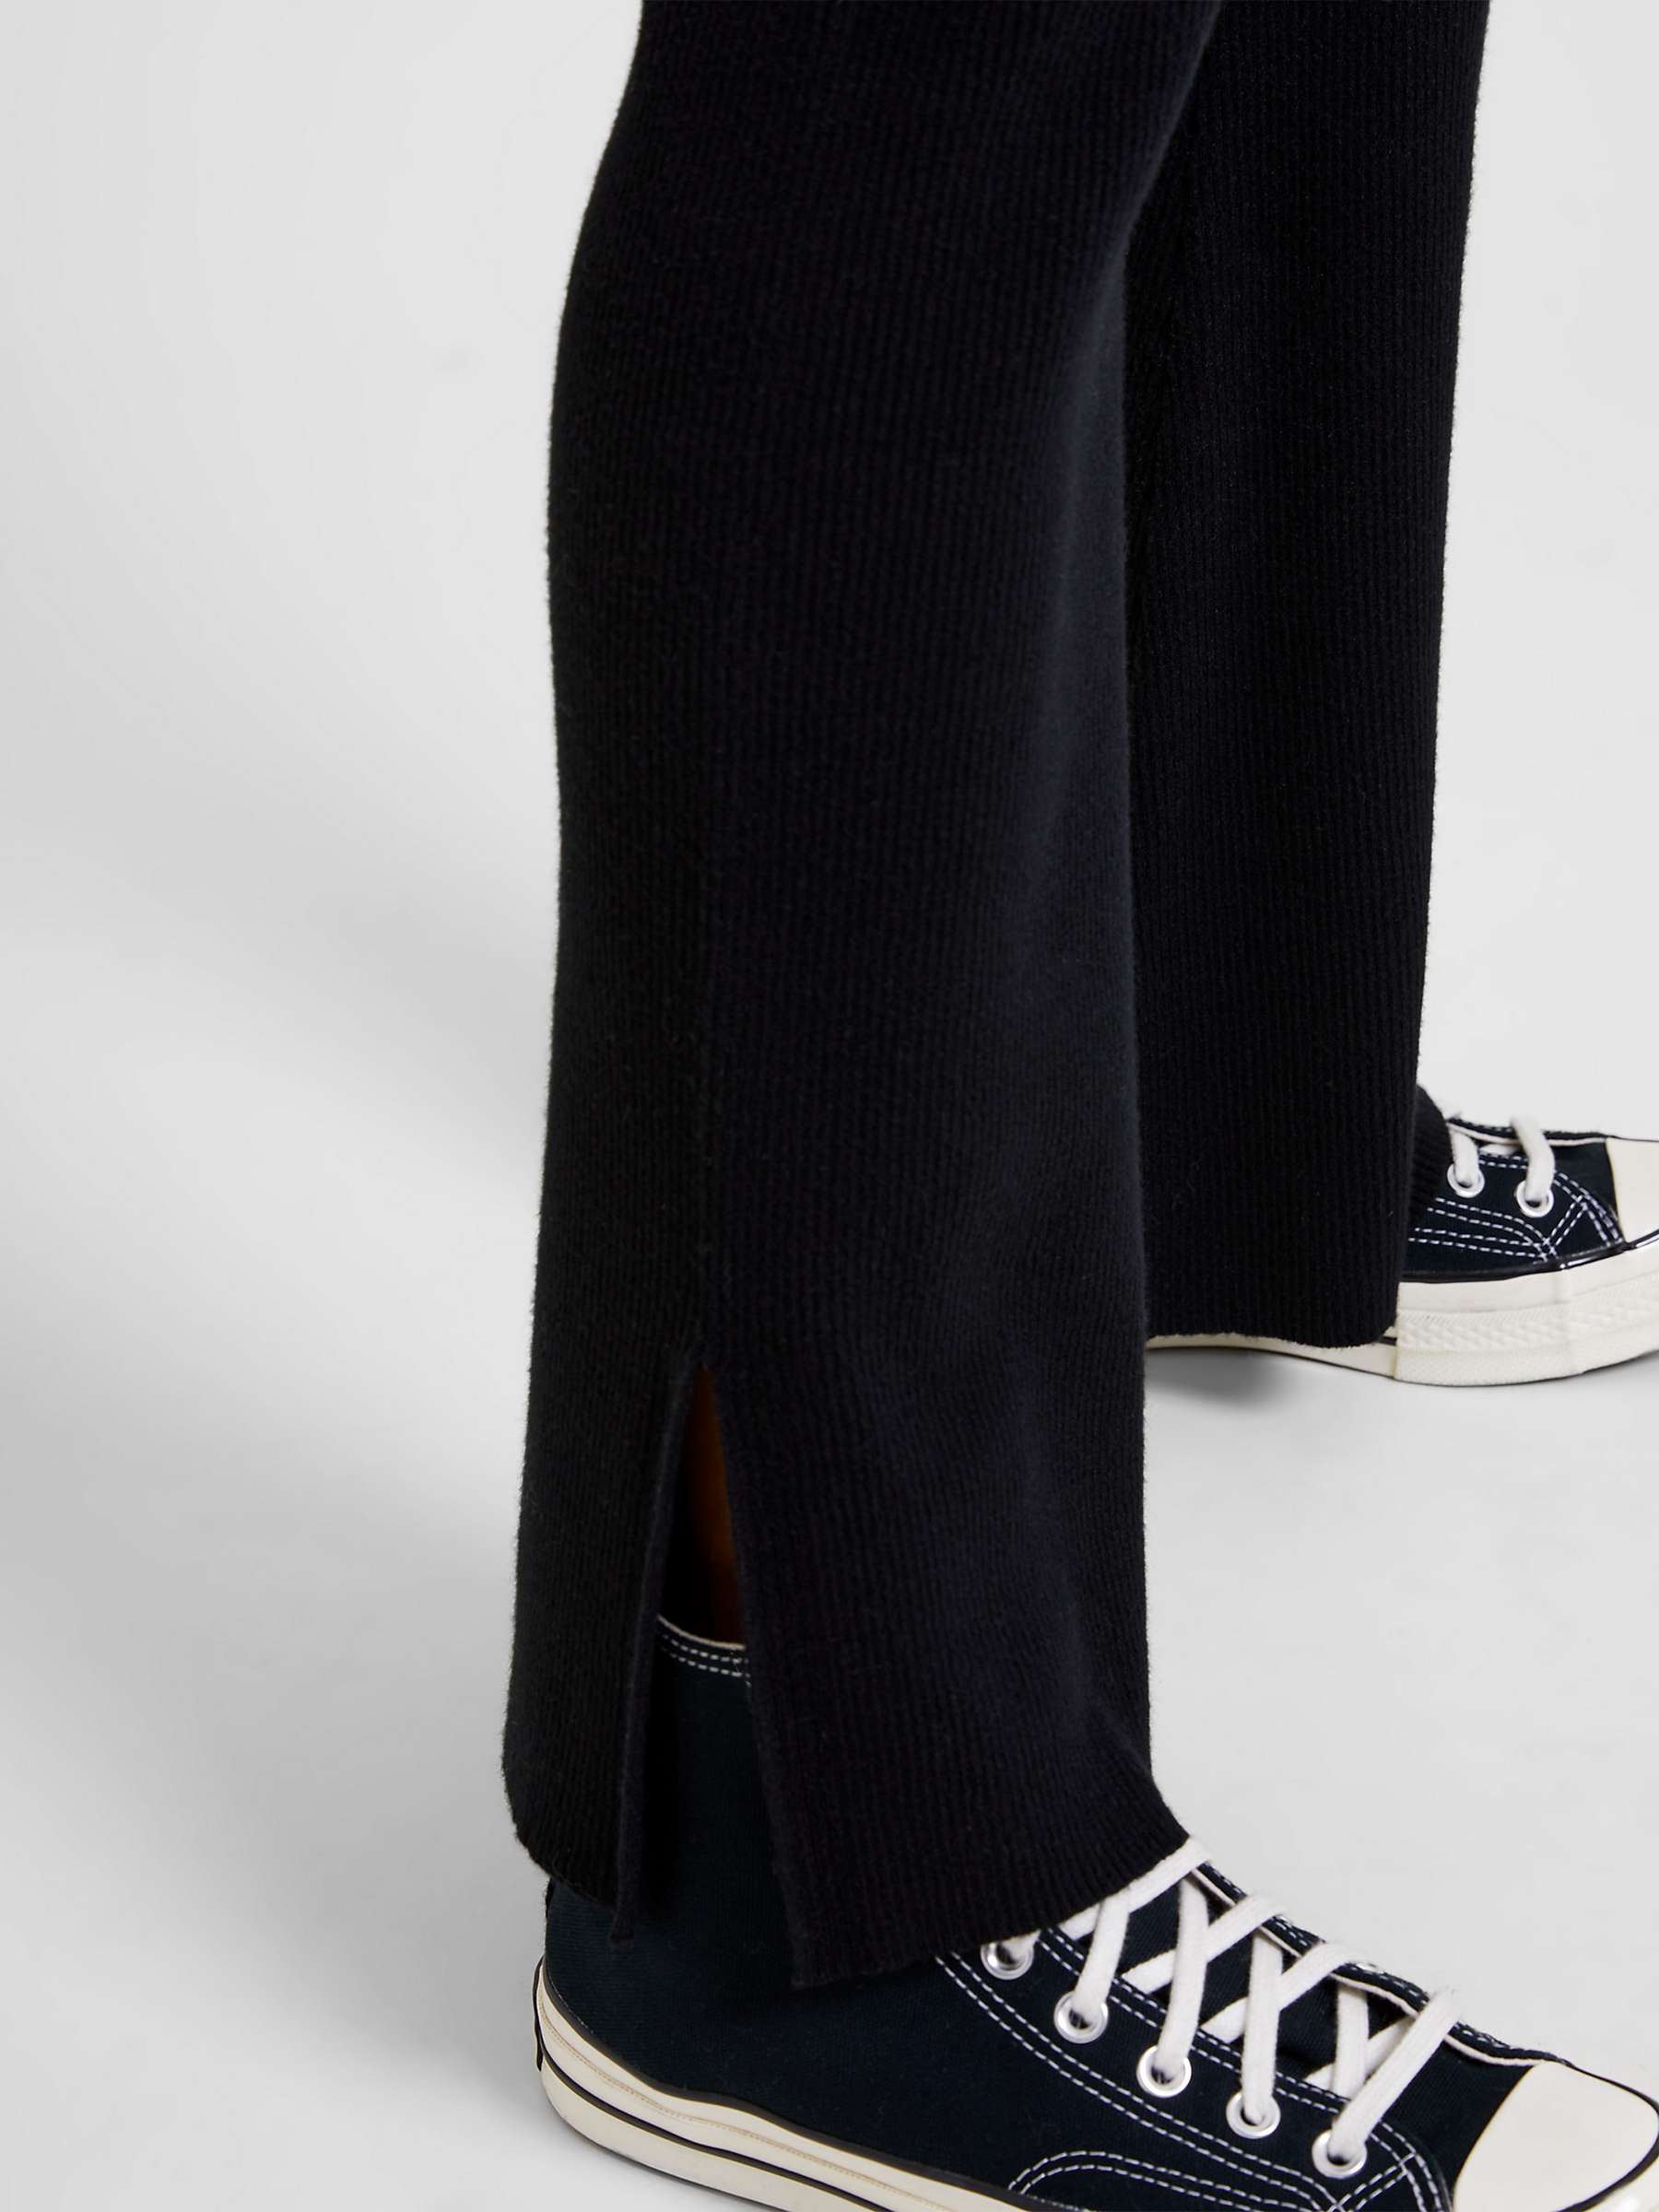 Buy Great Plains Ensley Knit High Waist Trousers, Black Online at johnlewis.com